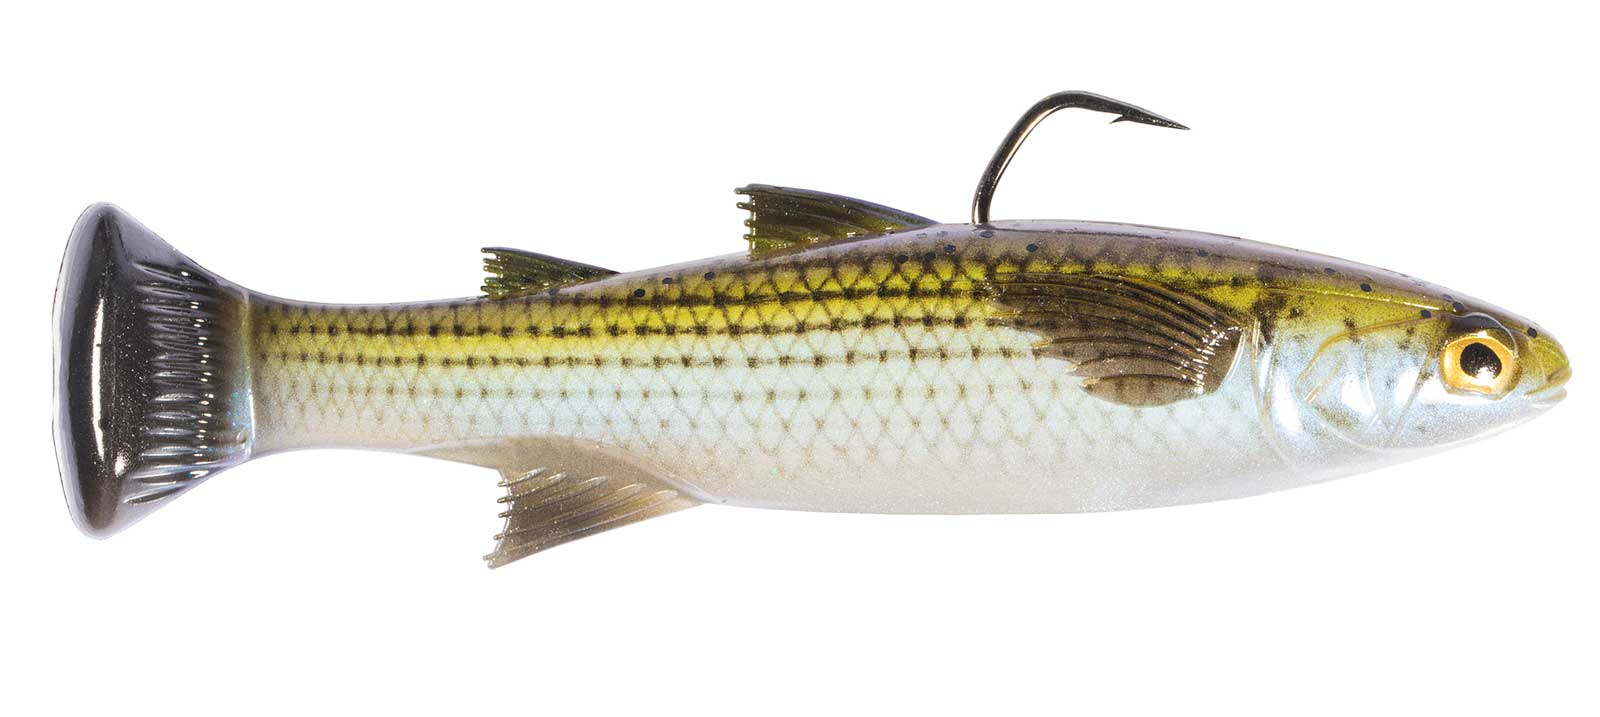 Mulletron LT (Line-Through) Swimbait by Z-Man Fishing Products